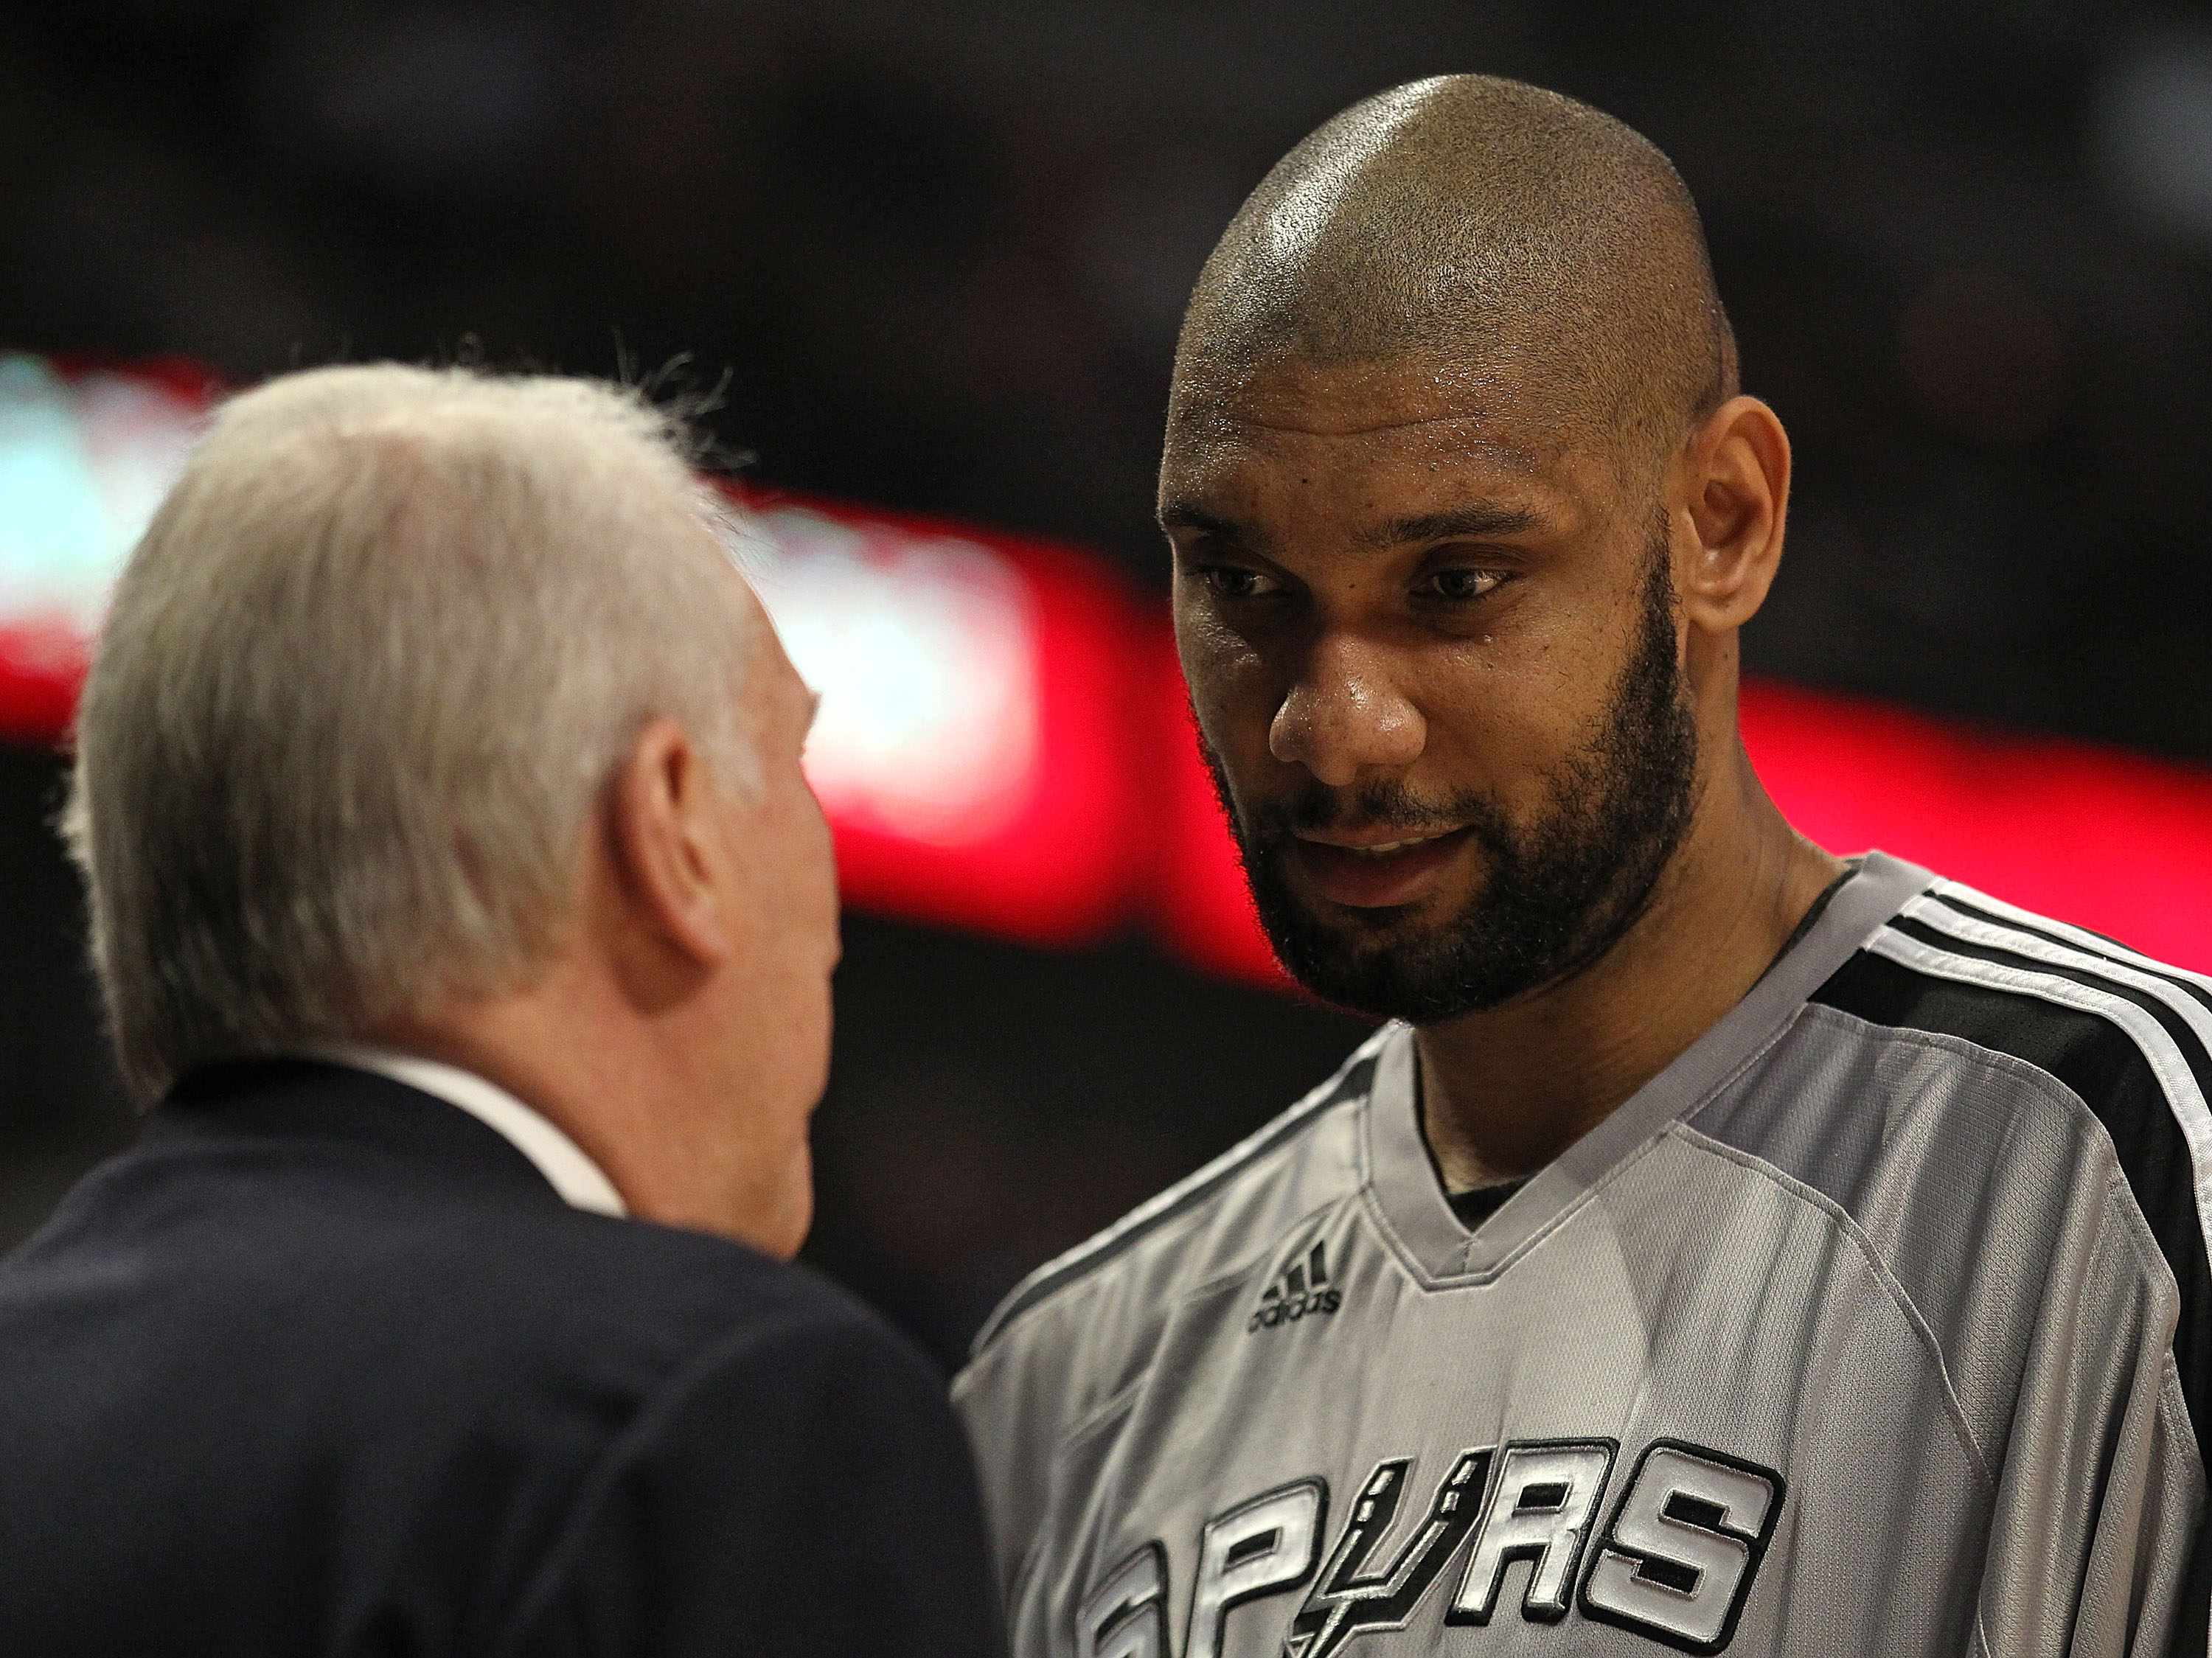 CHICAGO, IL - FEBRUARY 17: Tim Duncan #21 of the San Antonio Spurs talks with head coach Gregg Popovich during a game against the Chicago Bulls at the United Center on February 17, 2011 in Chicago, Illinois. The Bulls defeated the Spurs 109-99. NOTE TO US